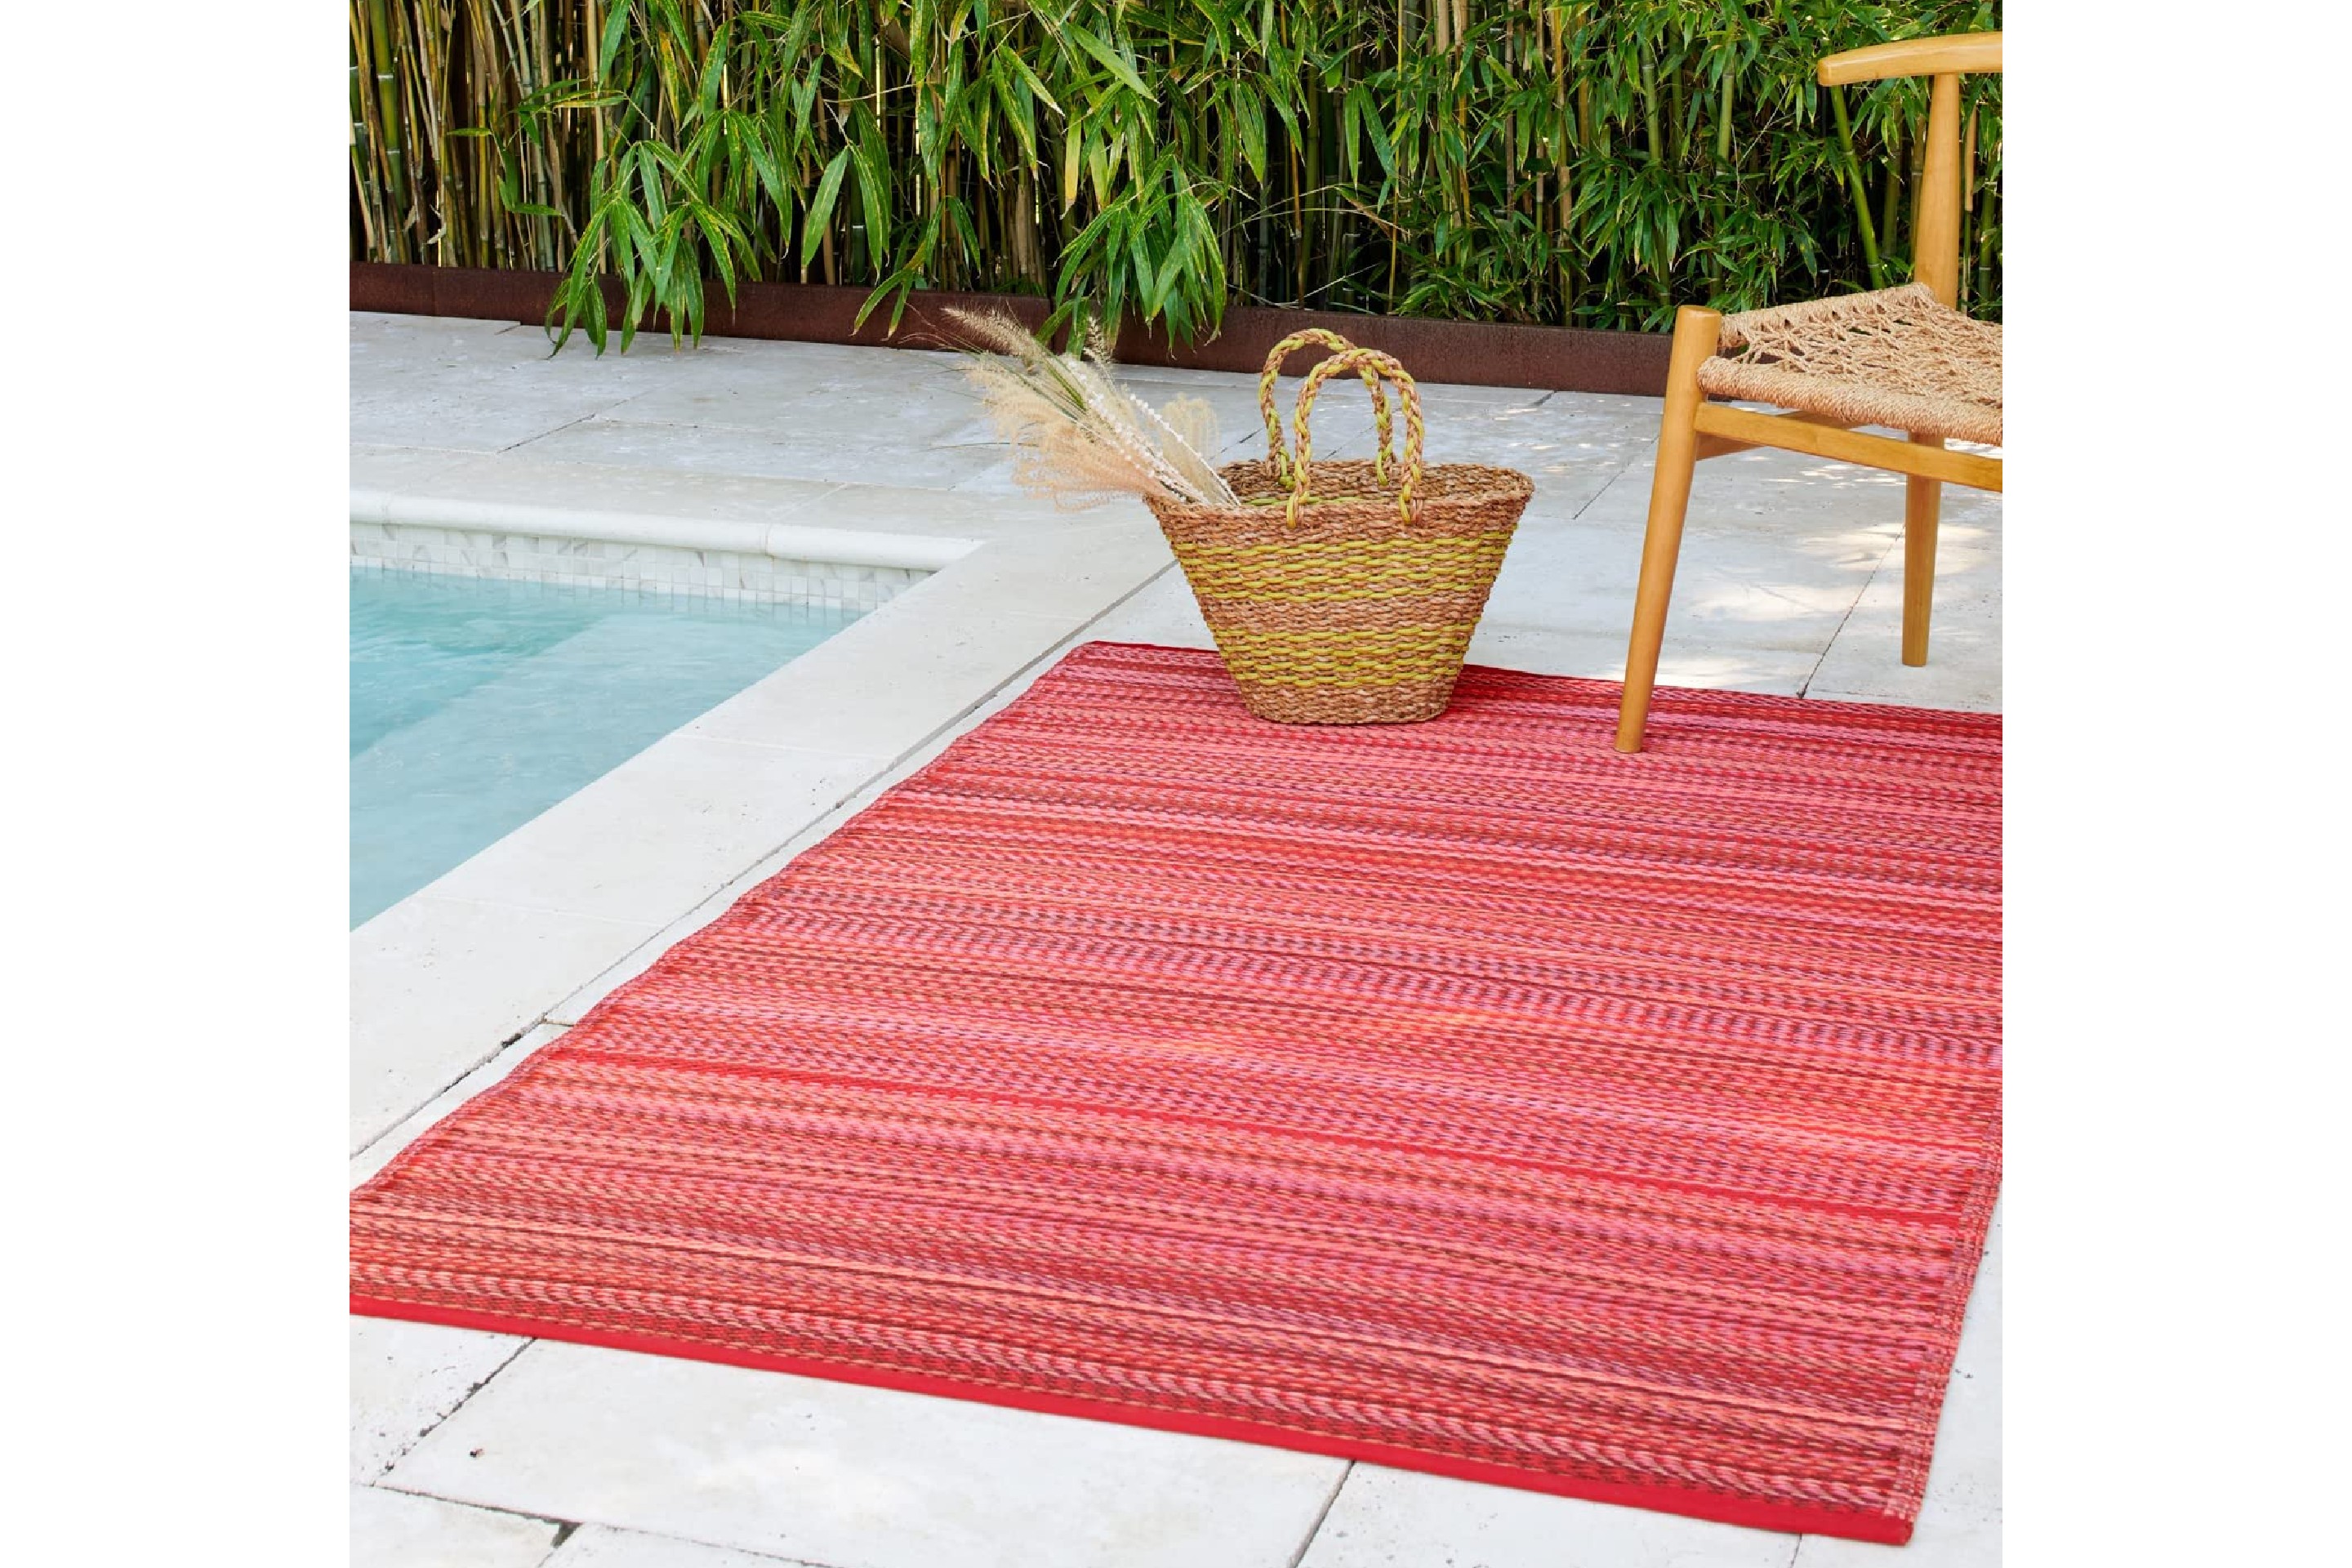 Best Outdoor Rugs 2023 - Forbes Vetted